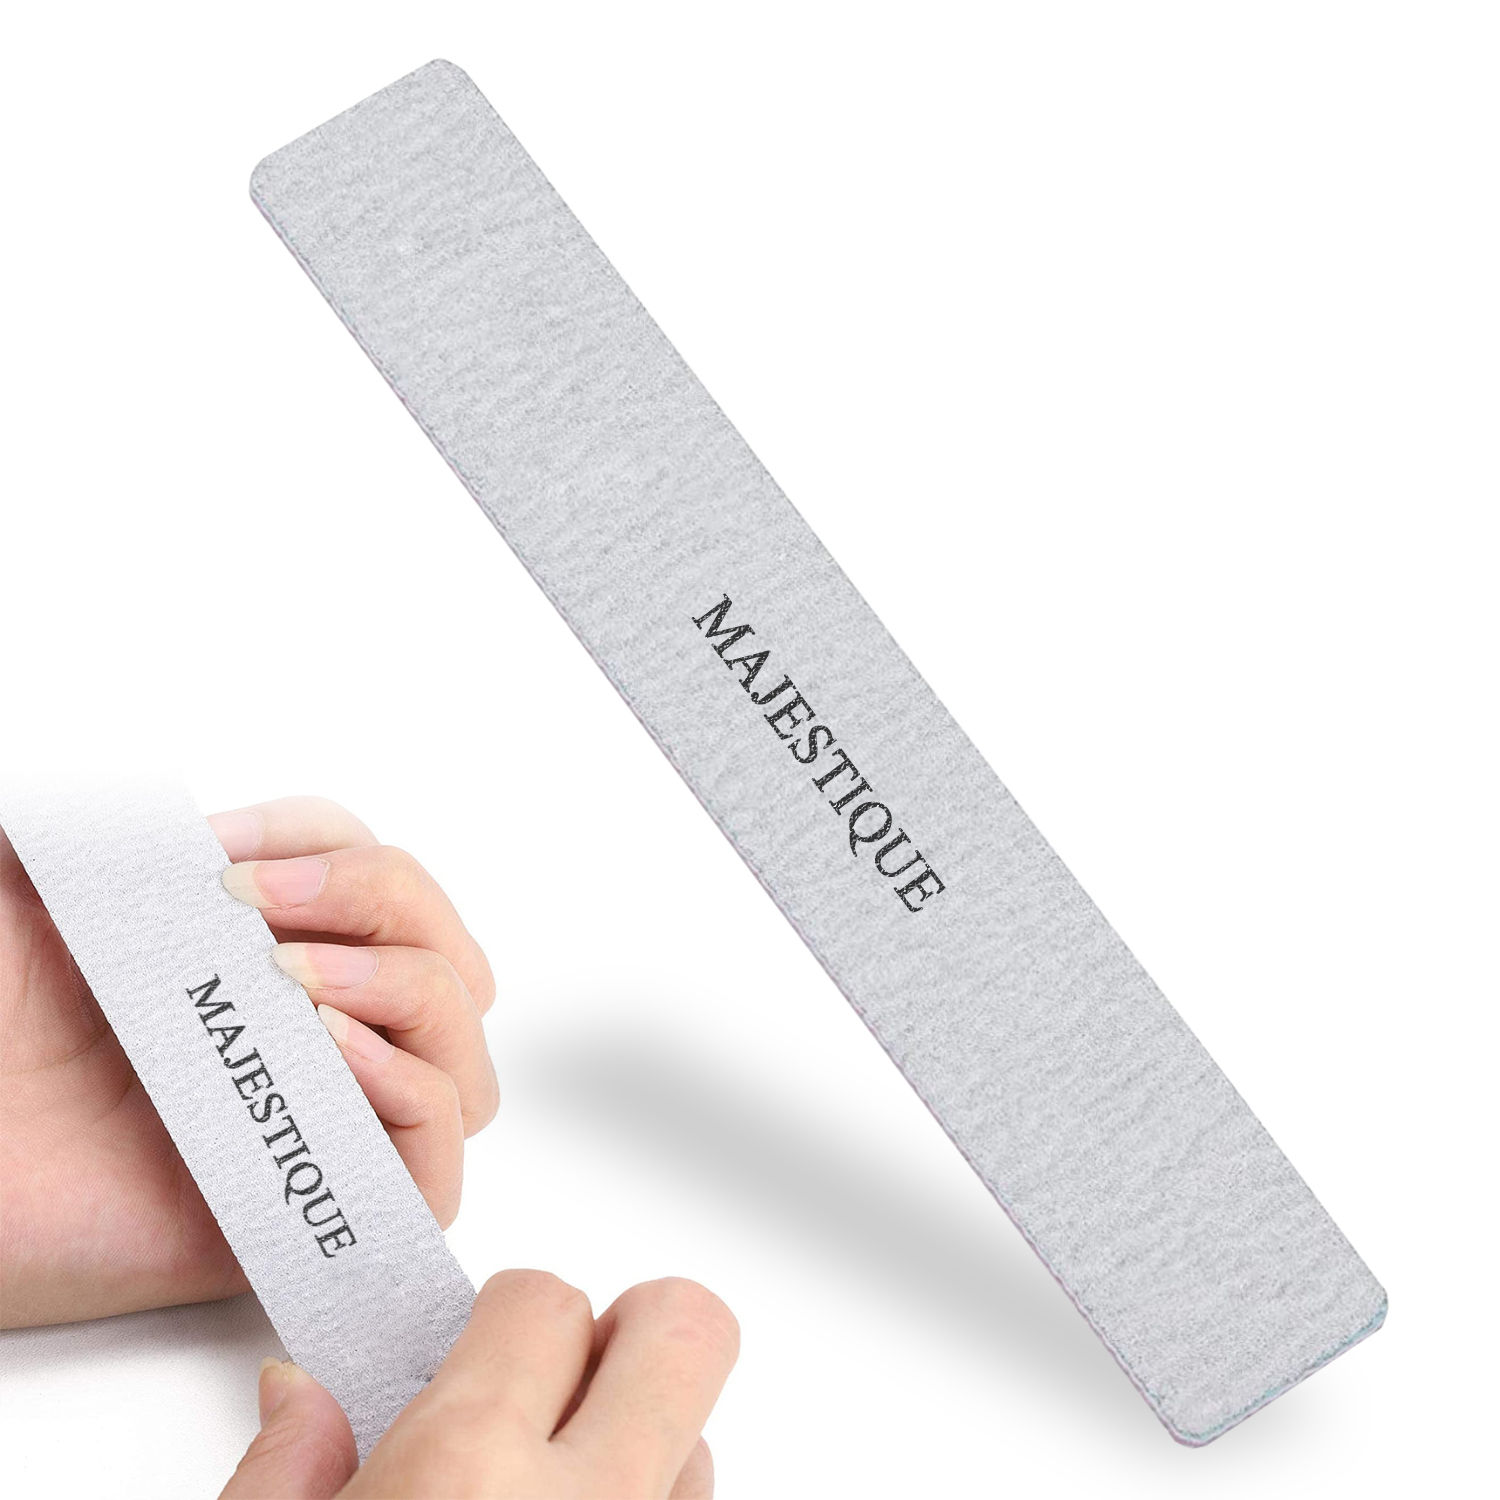 Buy Nail file 180*240 CND wholesale and retail in the store ubeauty.pro